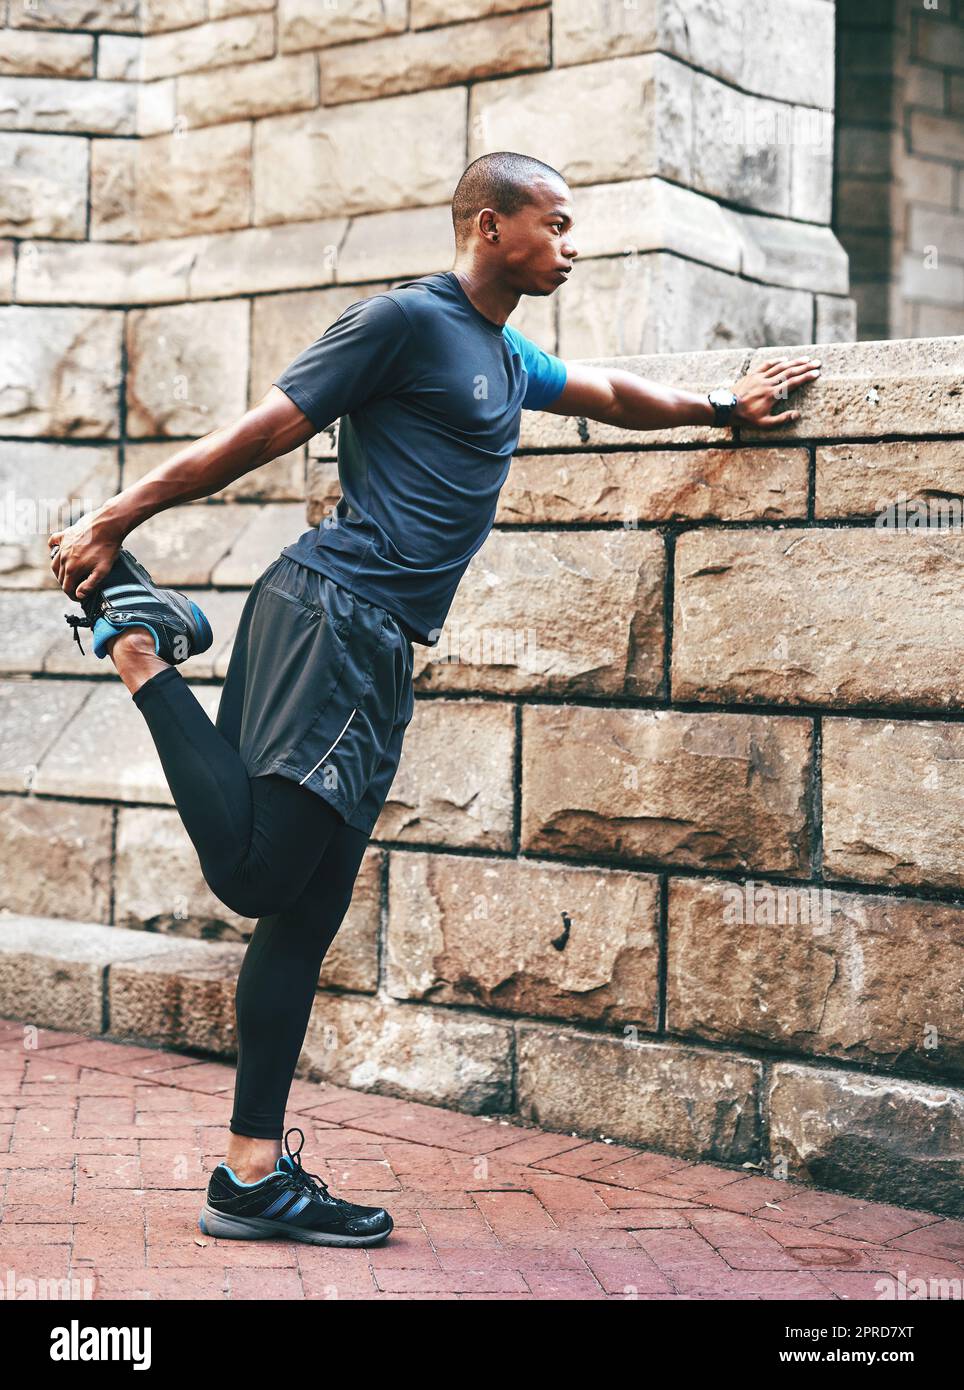 Hes just getting warmed up. Full length shot of a handsome young sportsman stretching and warming before exercising outdoors in the city. Stock Photo